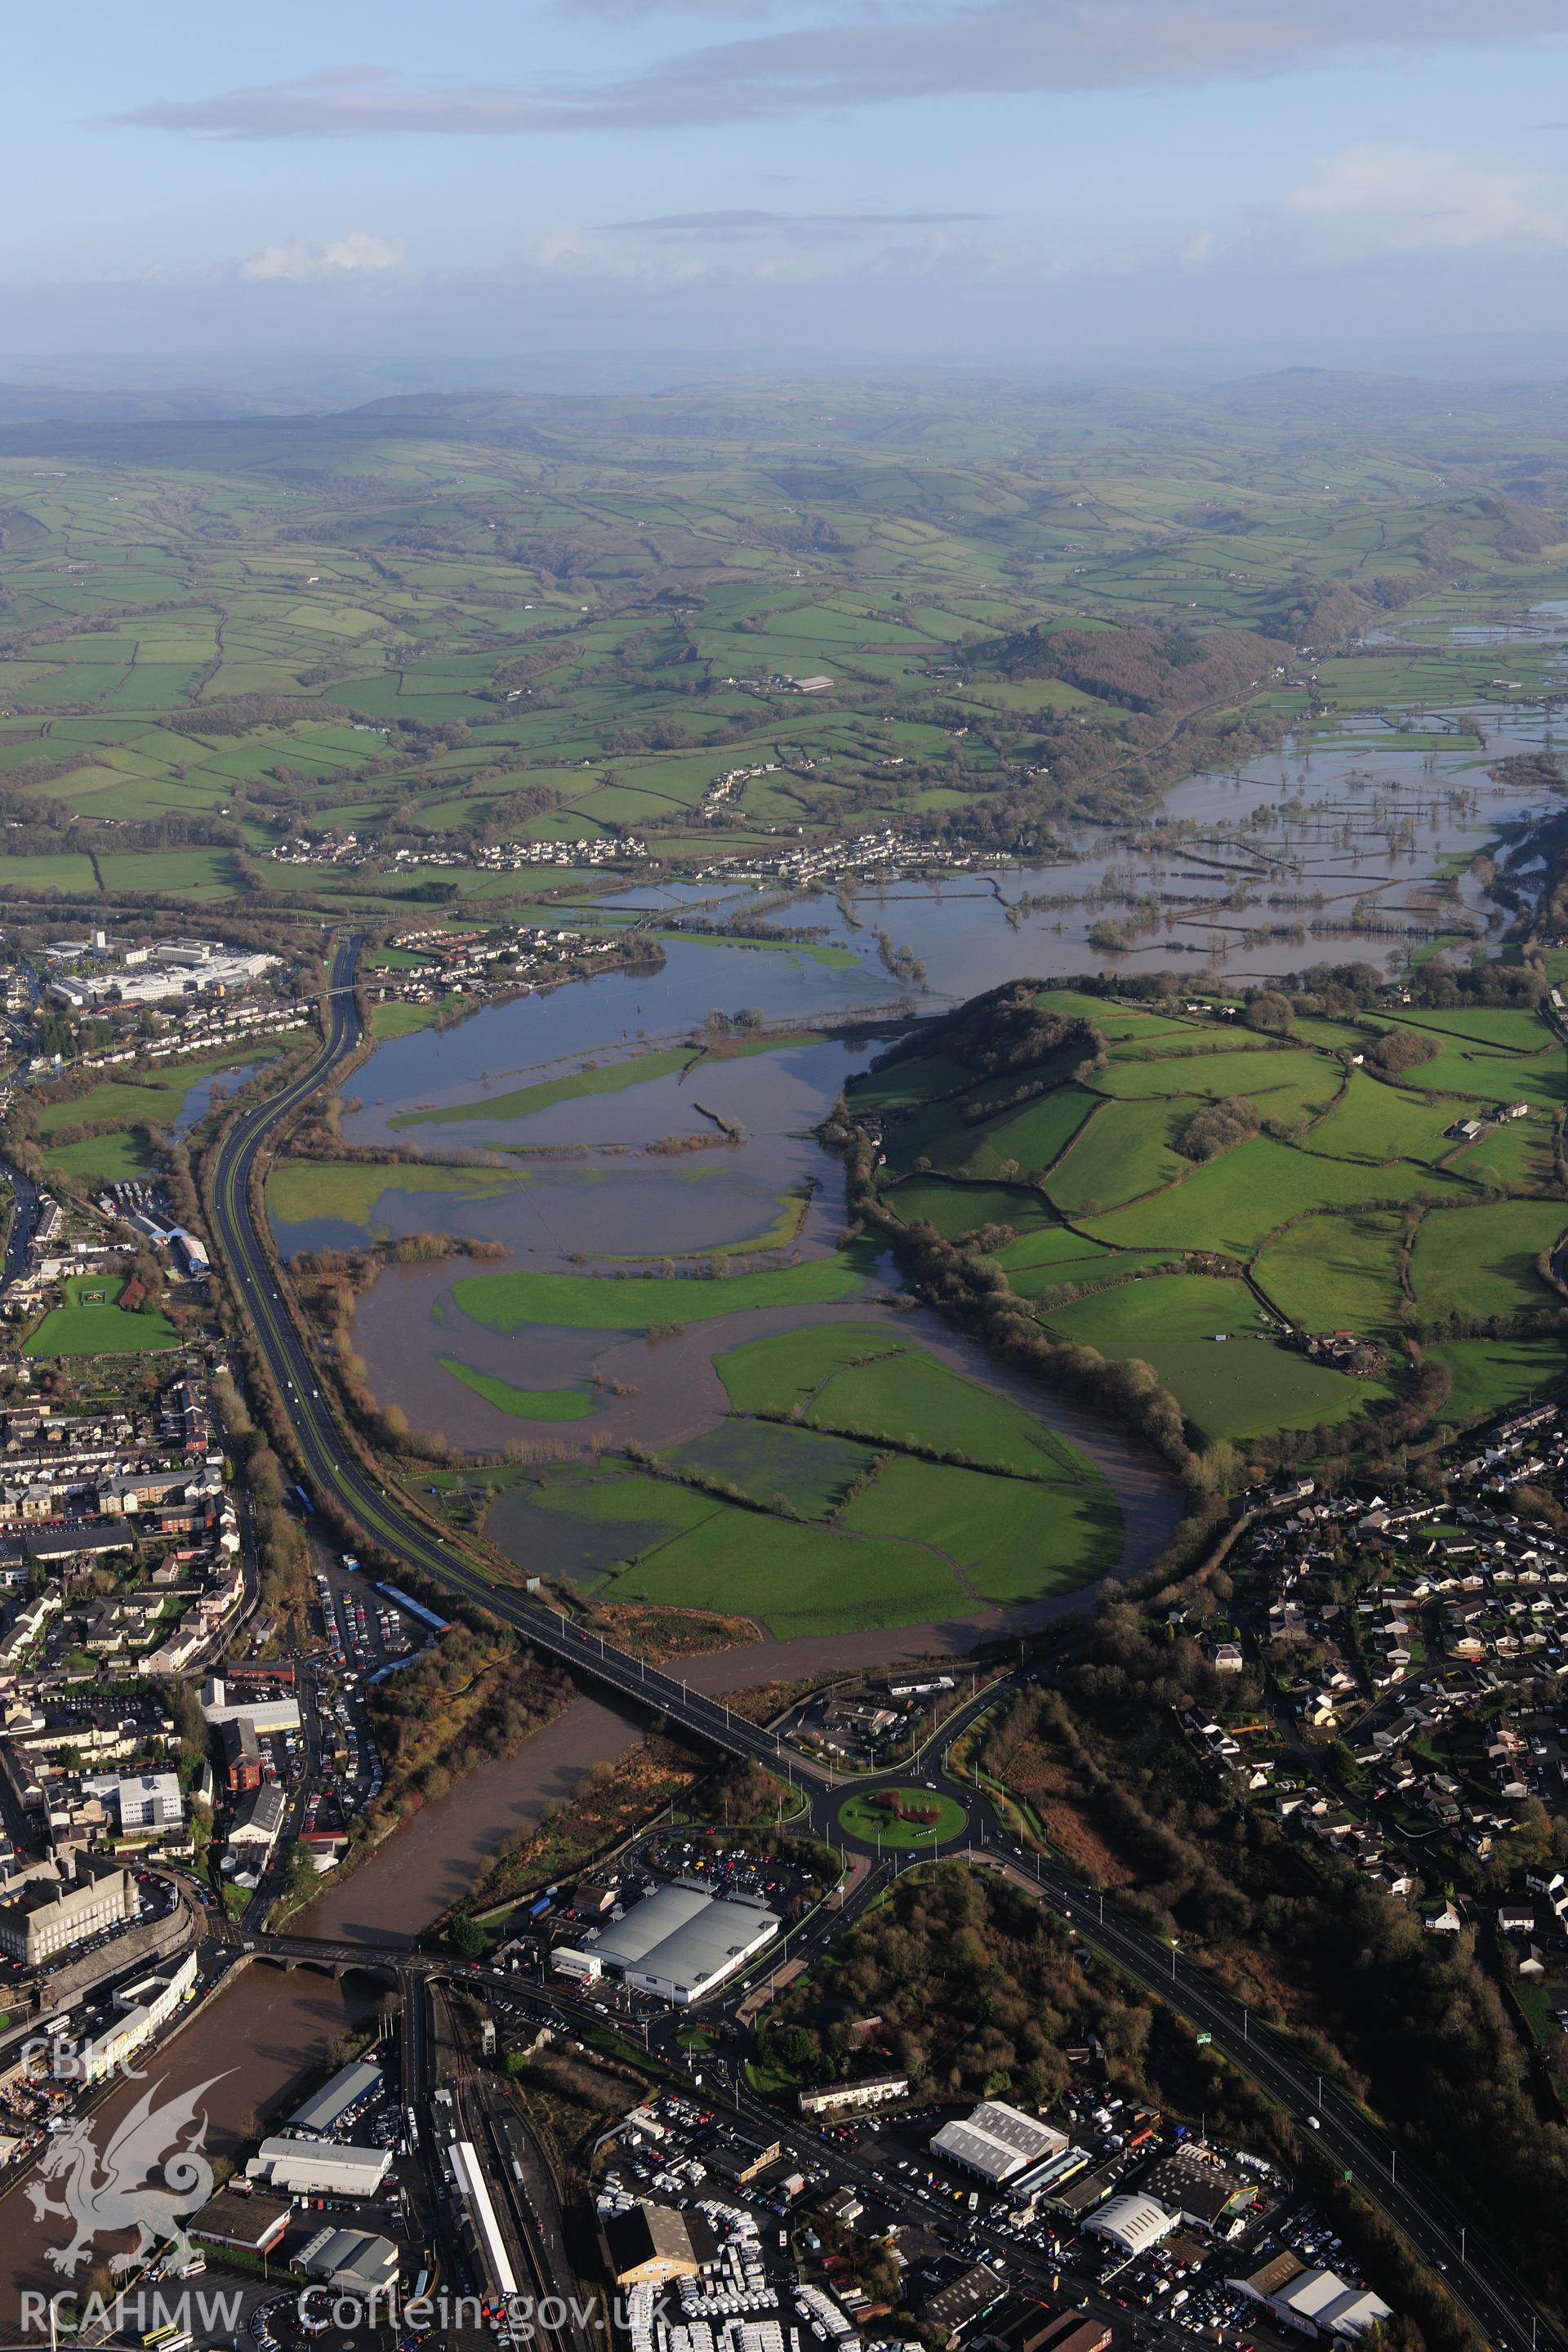 RCAHMW colour oblique photograph of Carmarthen townscape, looking east with flooding on the Tywi. Taken by Toby Driver on 23/11/2012.